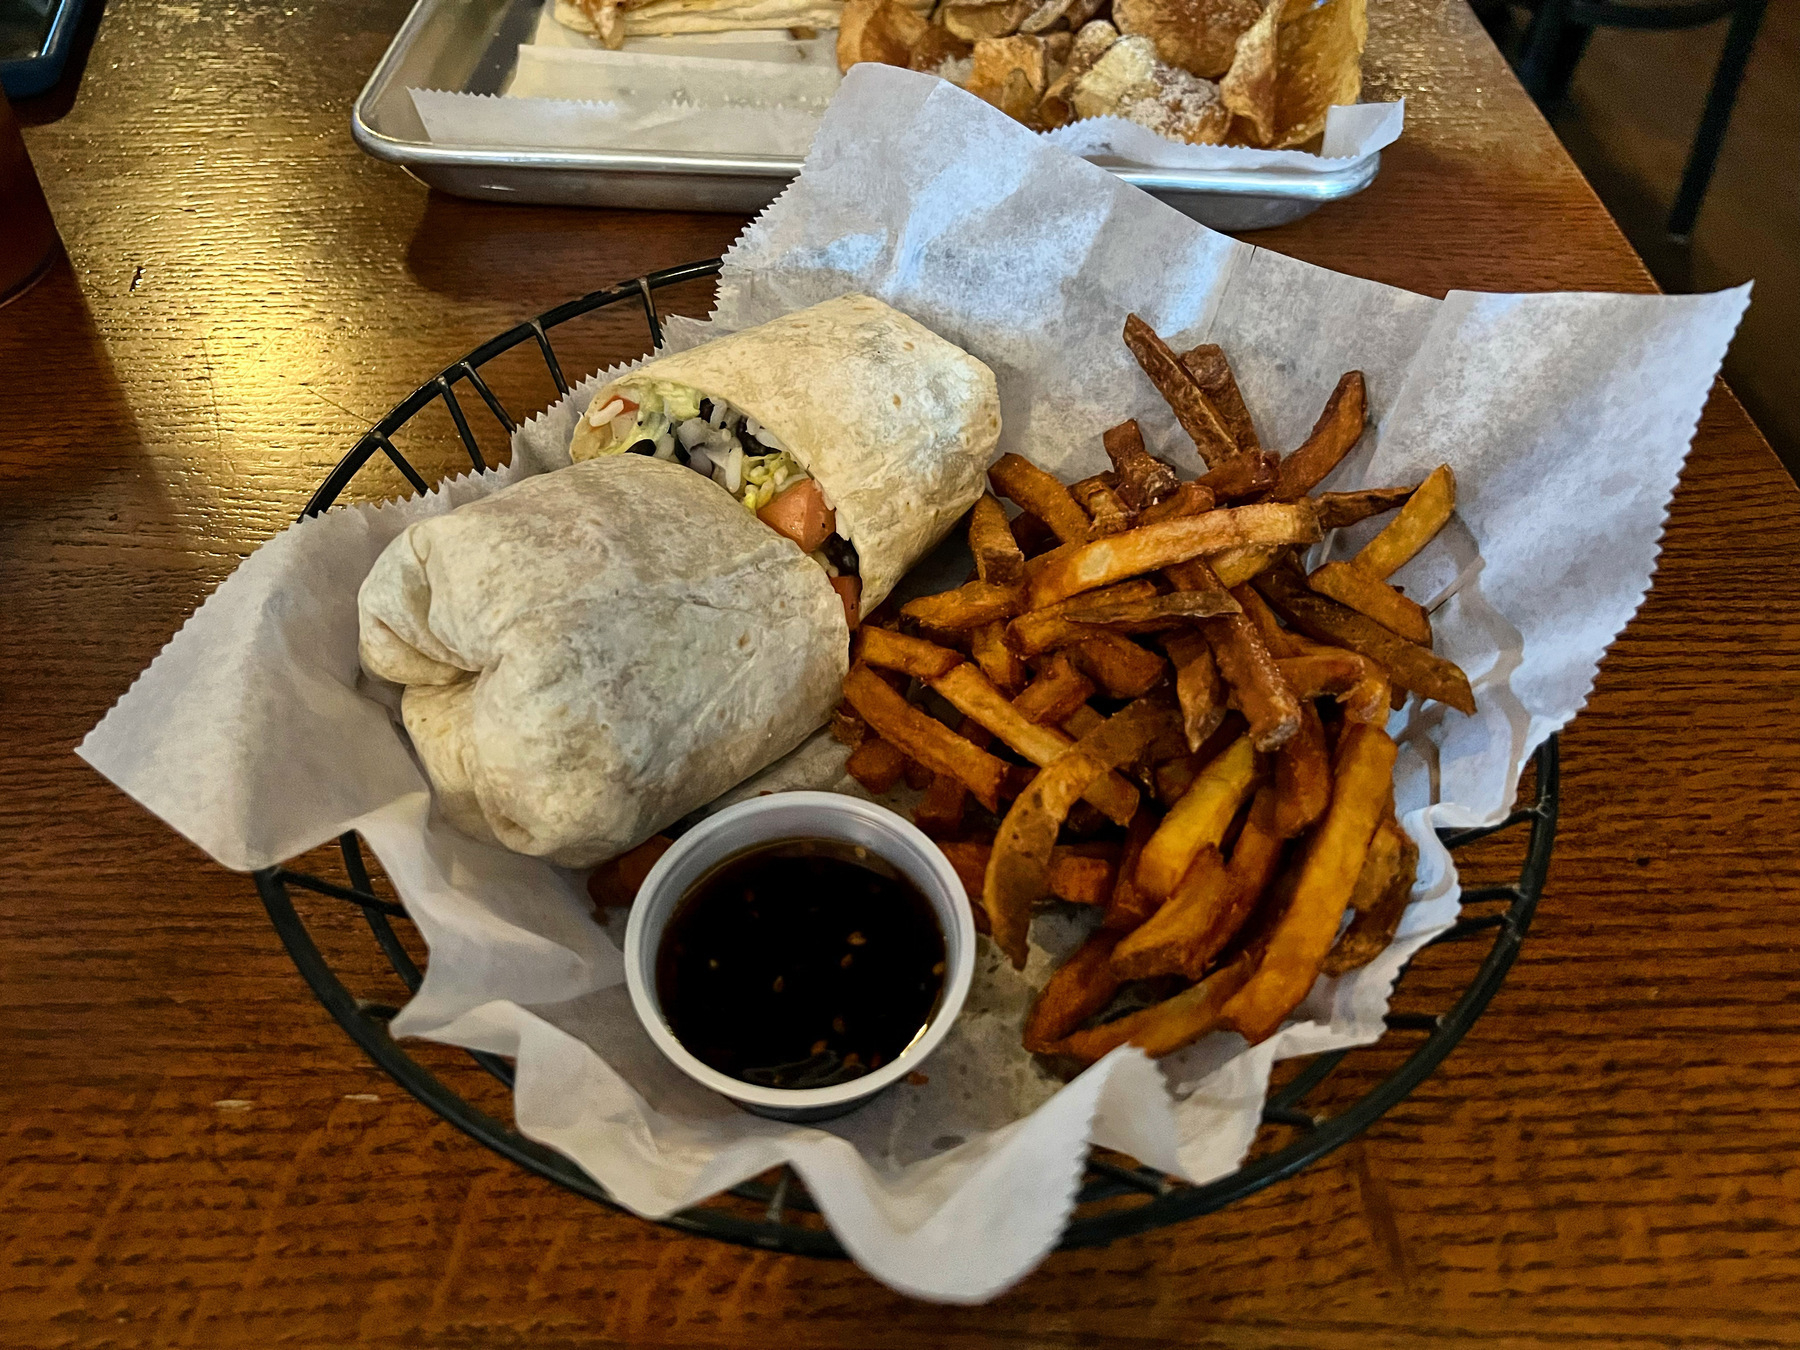 Veggie wrap (with fish) and fries with teriyaki sauce, in a wire basket on top of serving paper.